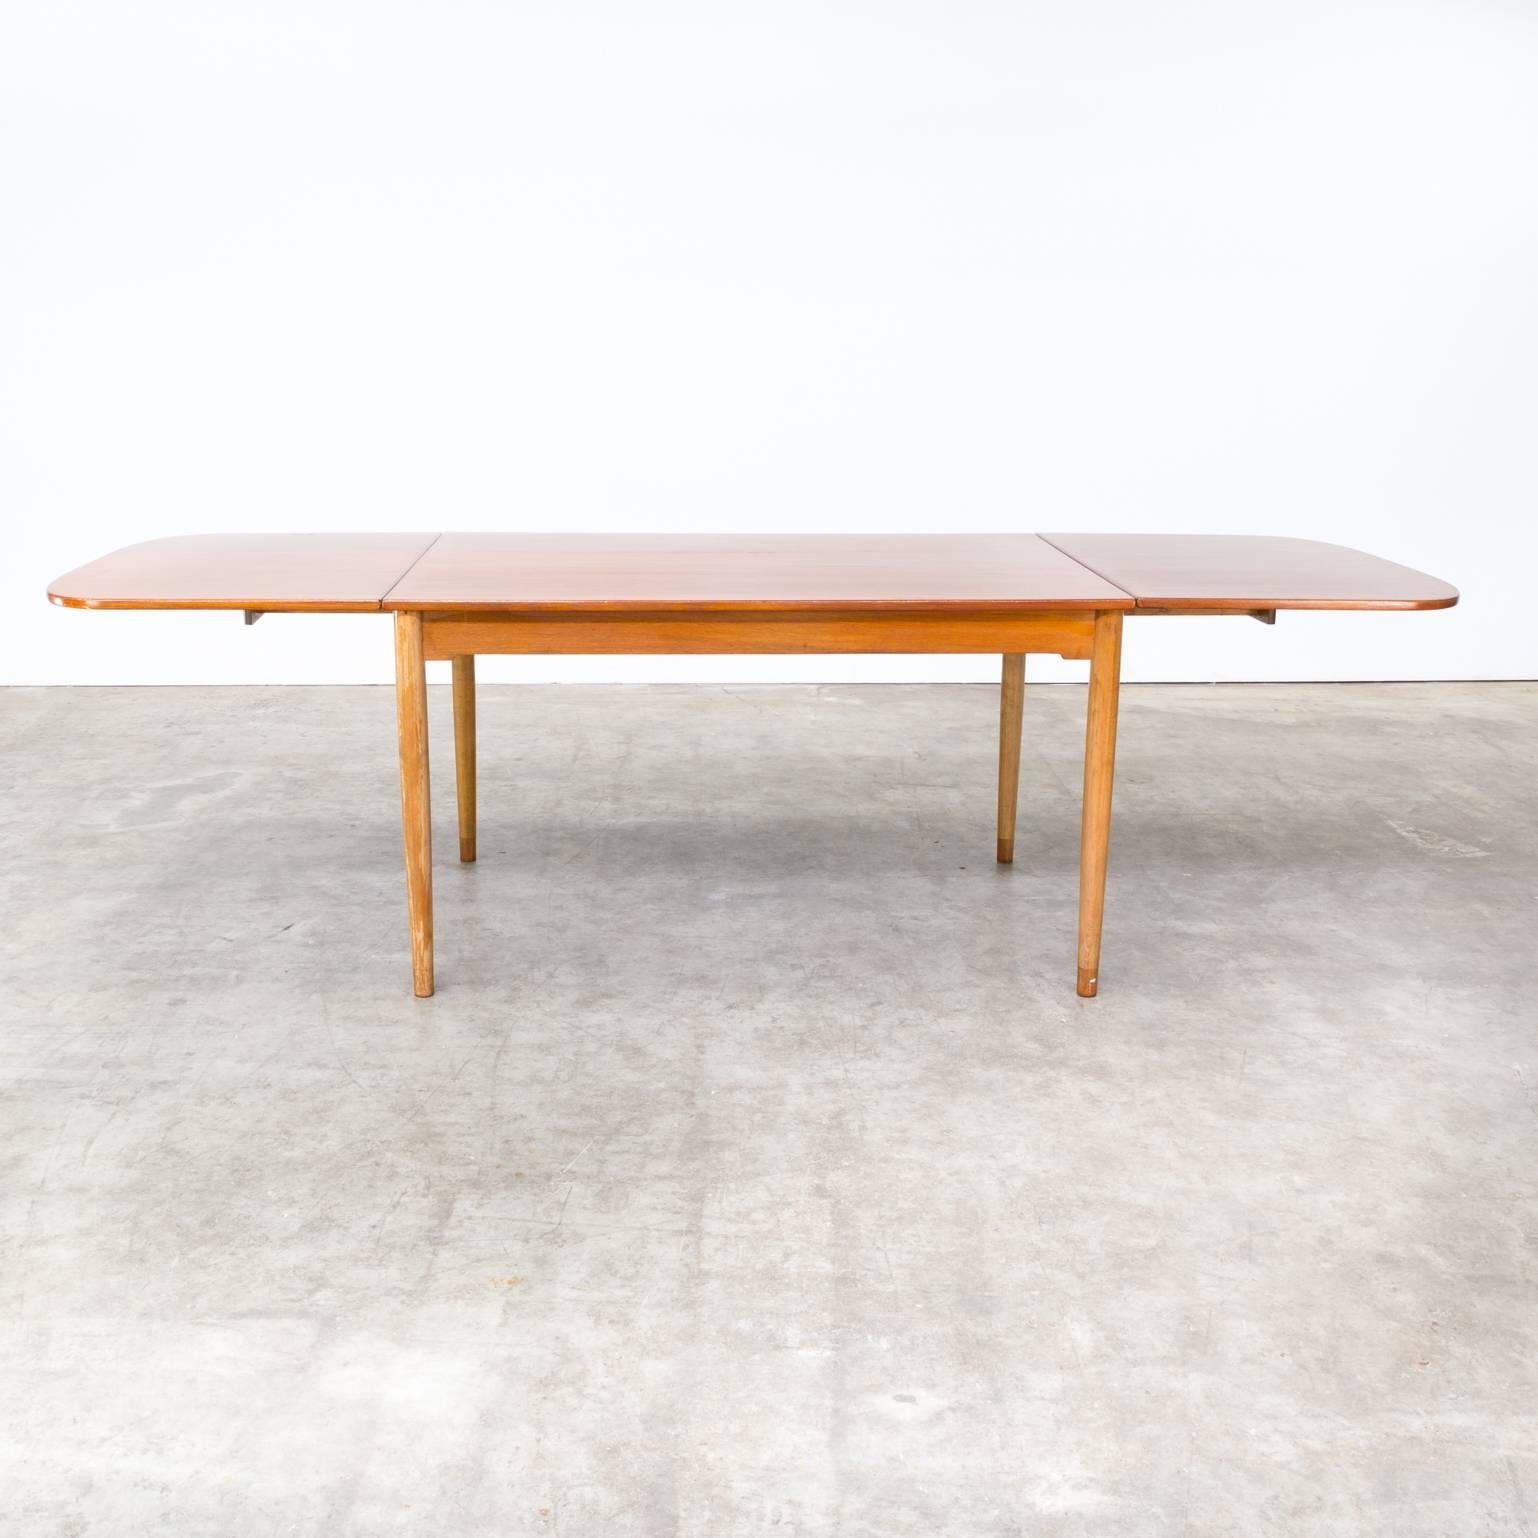 Hans Wegner Beautiful Rare Drop Leaf Dining Table In Excellent Condition For Sale In Amstelveen, Noord